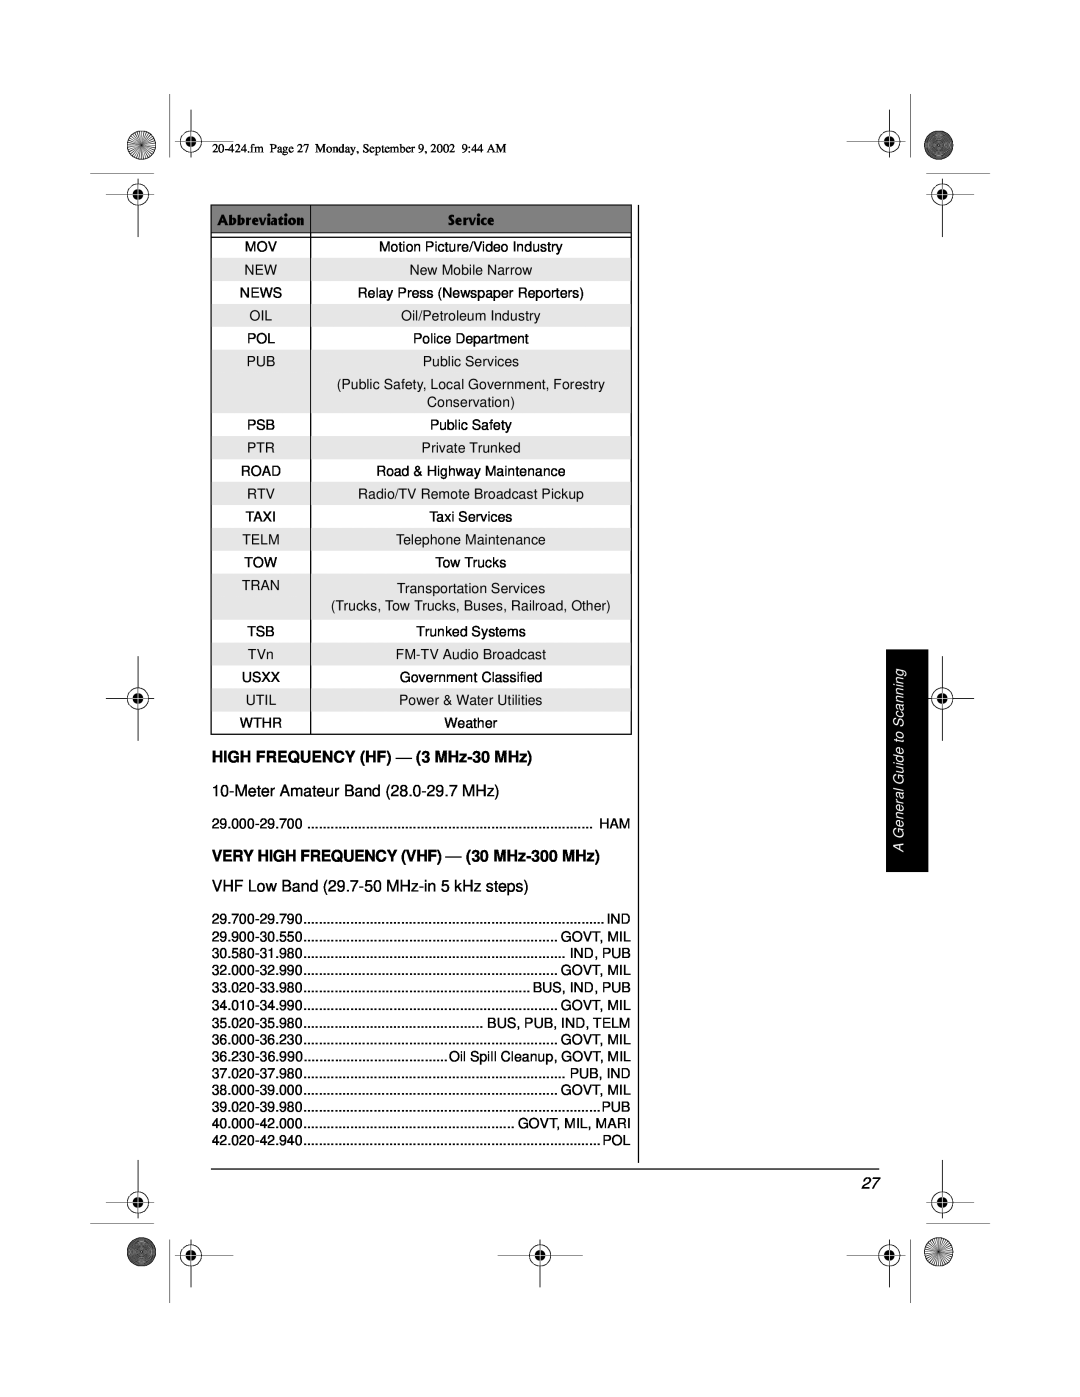 Radio Shack PRO-2018 manual HIGH FREQUENCY HF - 3 MHz-30 MHz, Meter Amateur Band 28.0-29.7 MHz, A General Guide to Scanning 